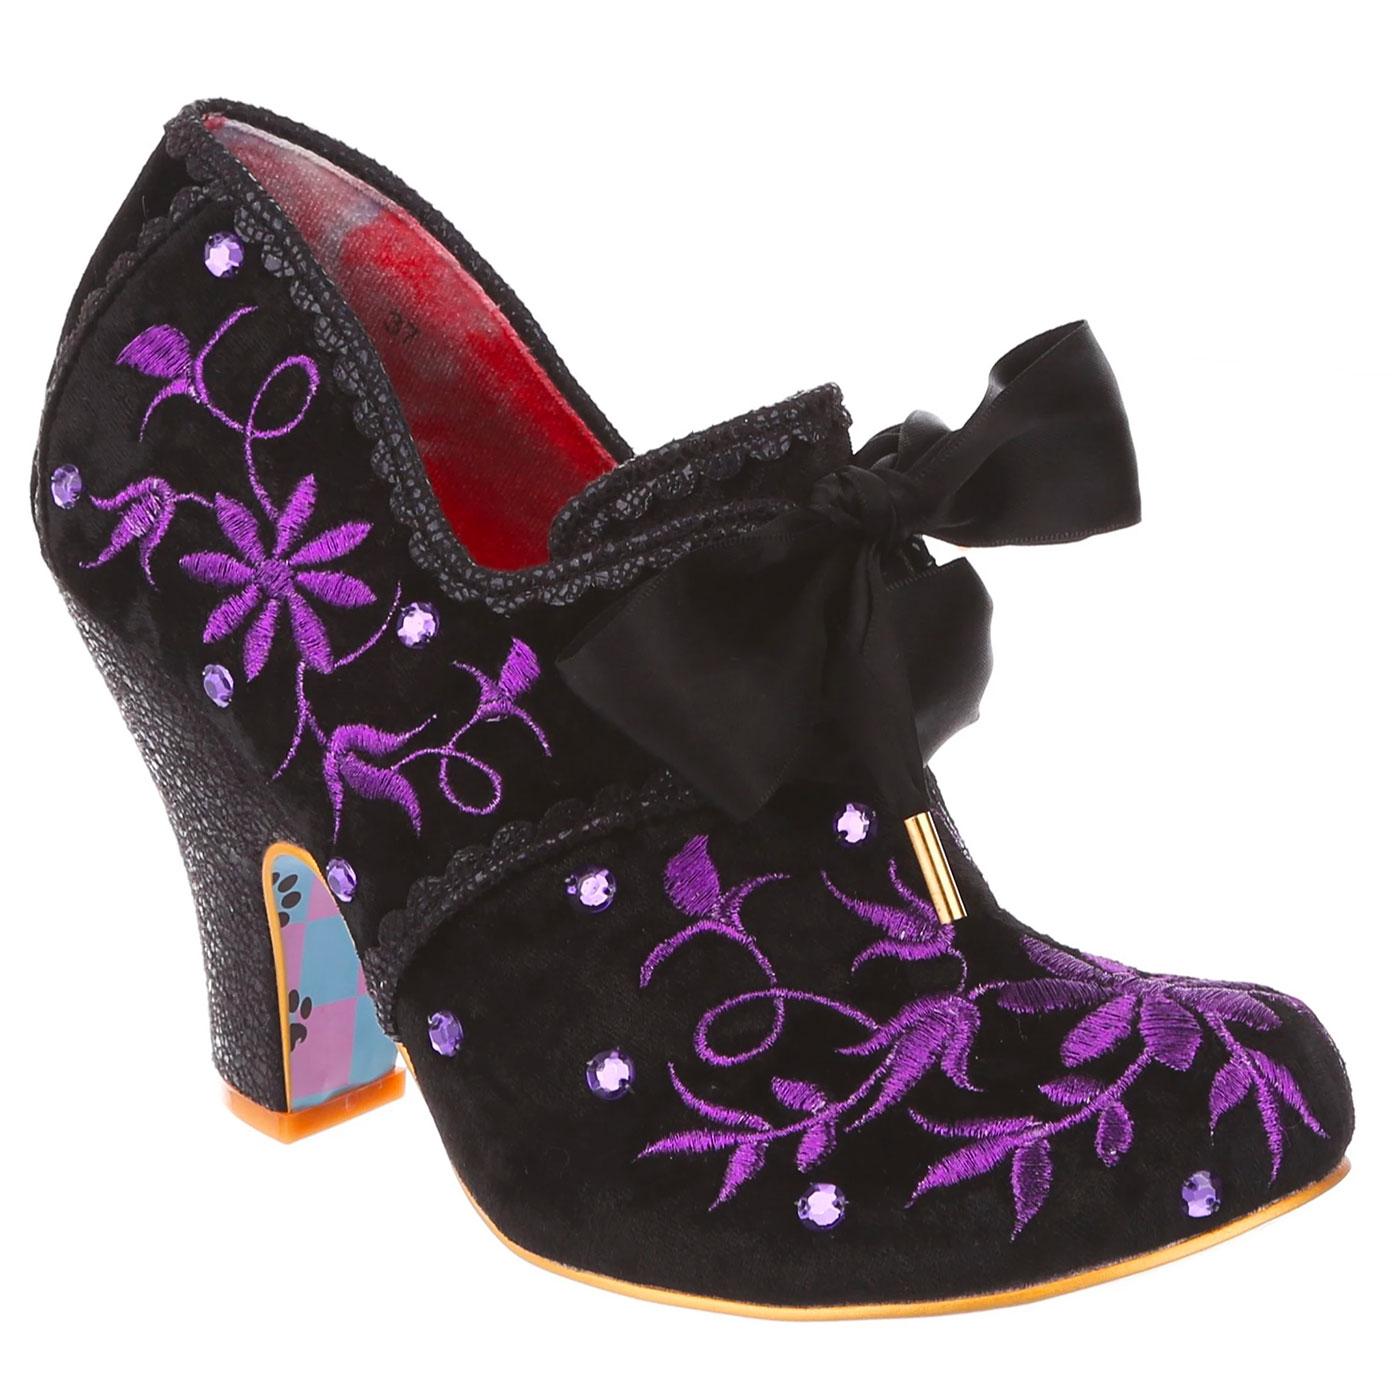 Penny For Your Thoughts IRREGULAR CHOICE Heels B/P